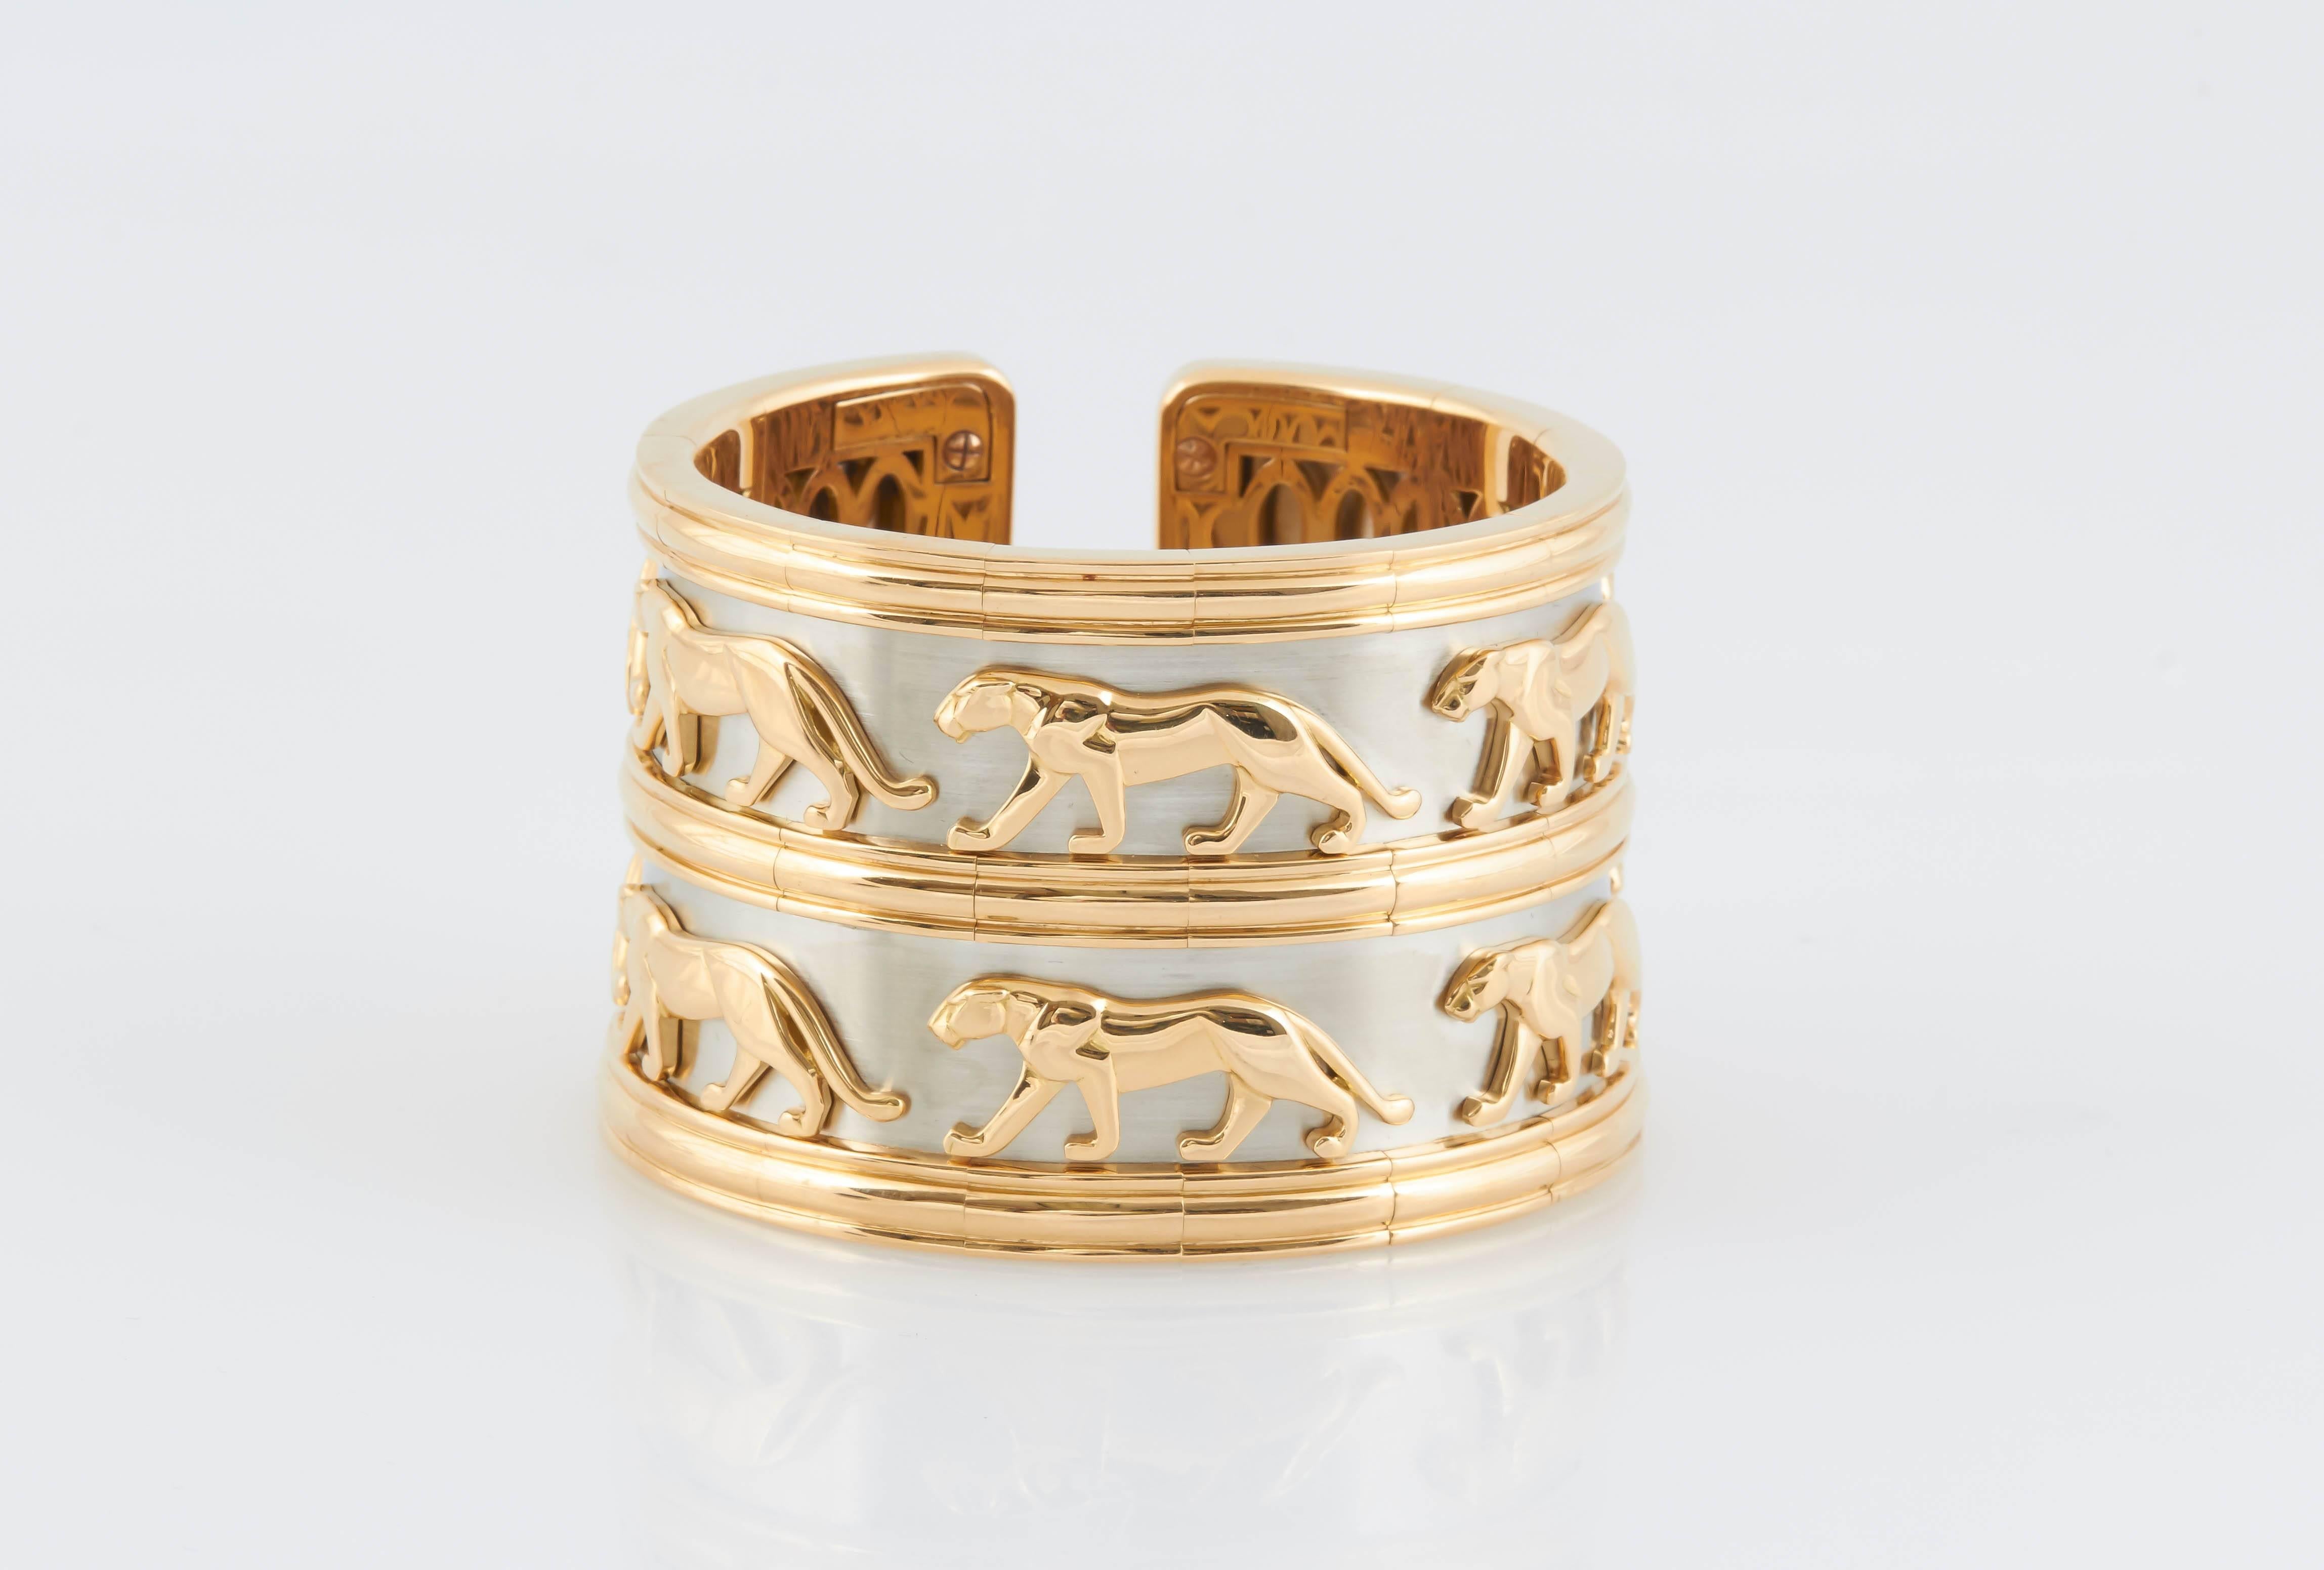 Remarkable 18K white and yellow gold double cuff bracelet from the 